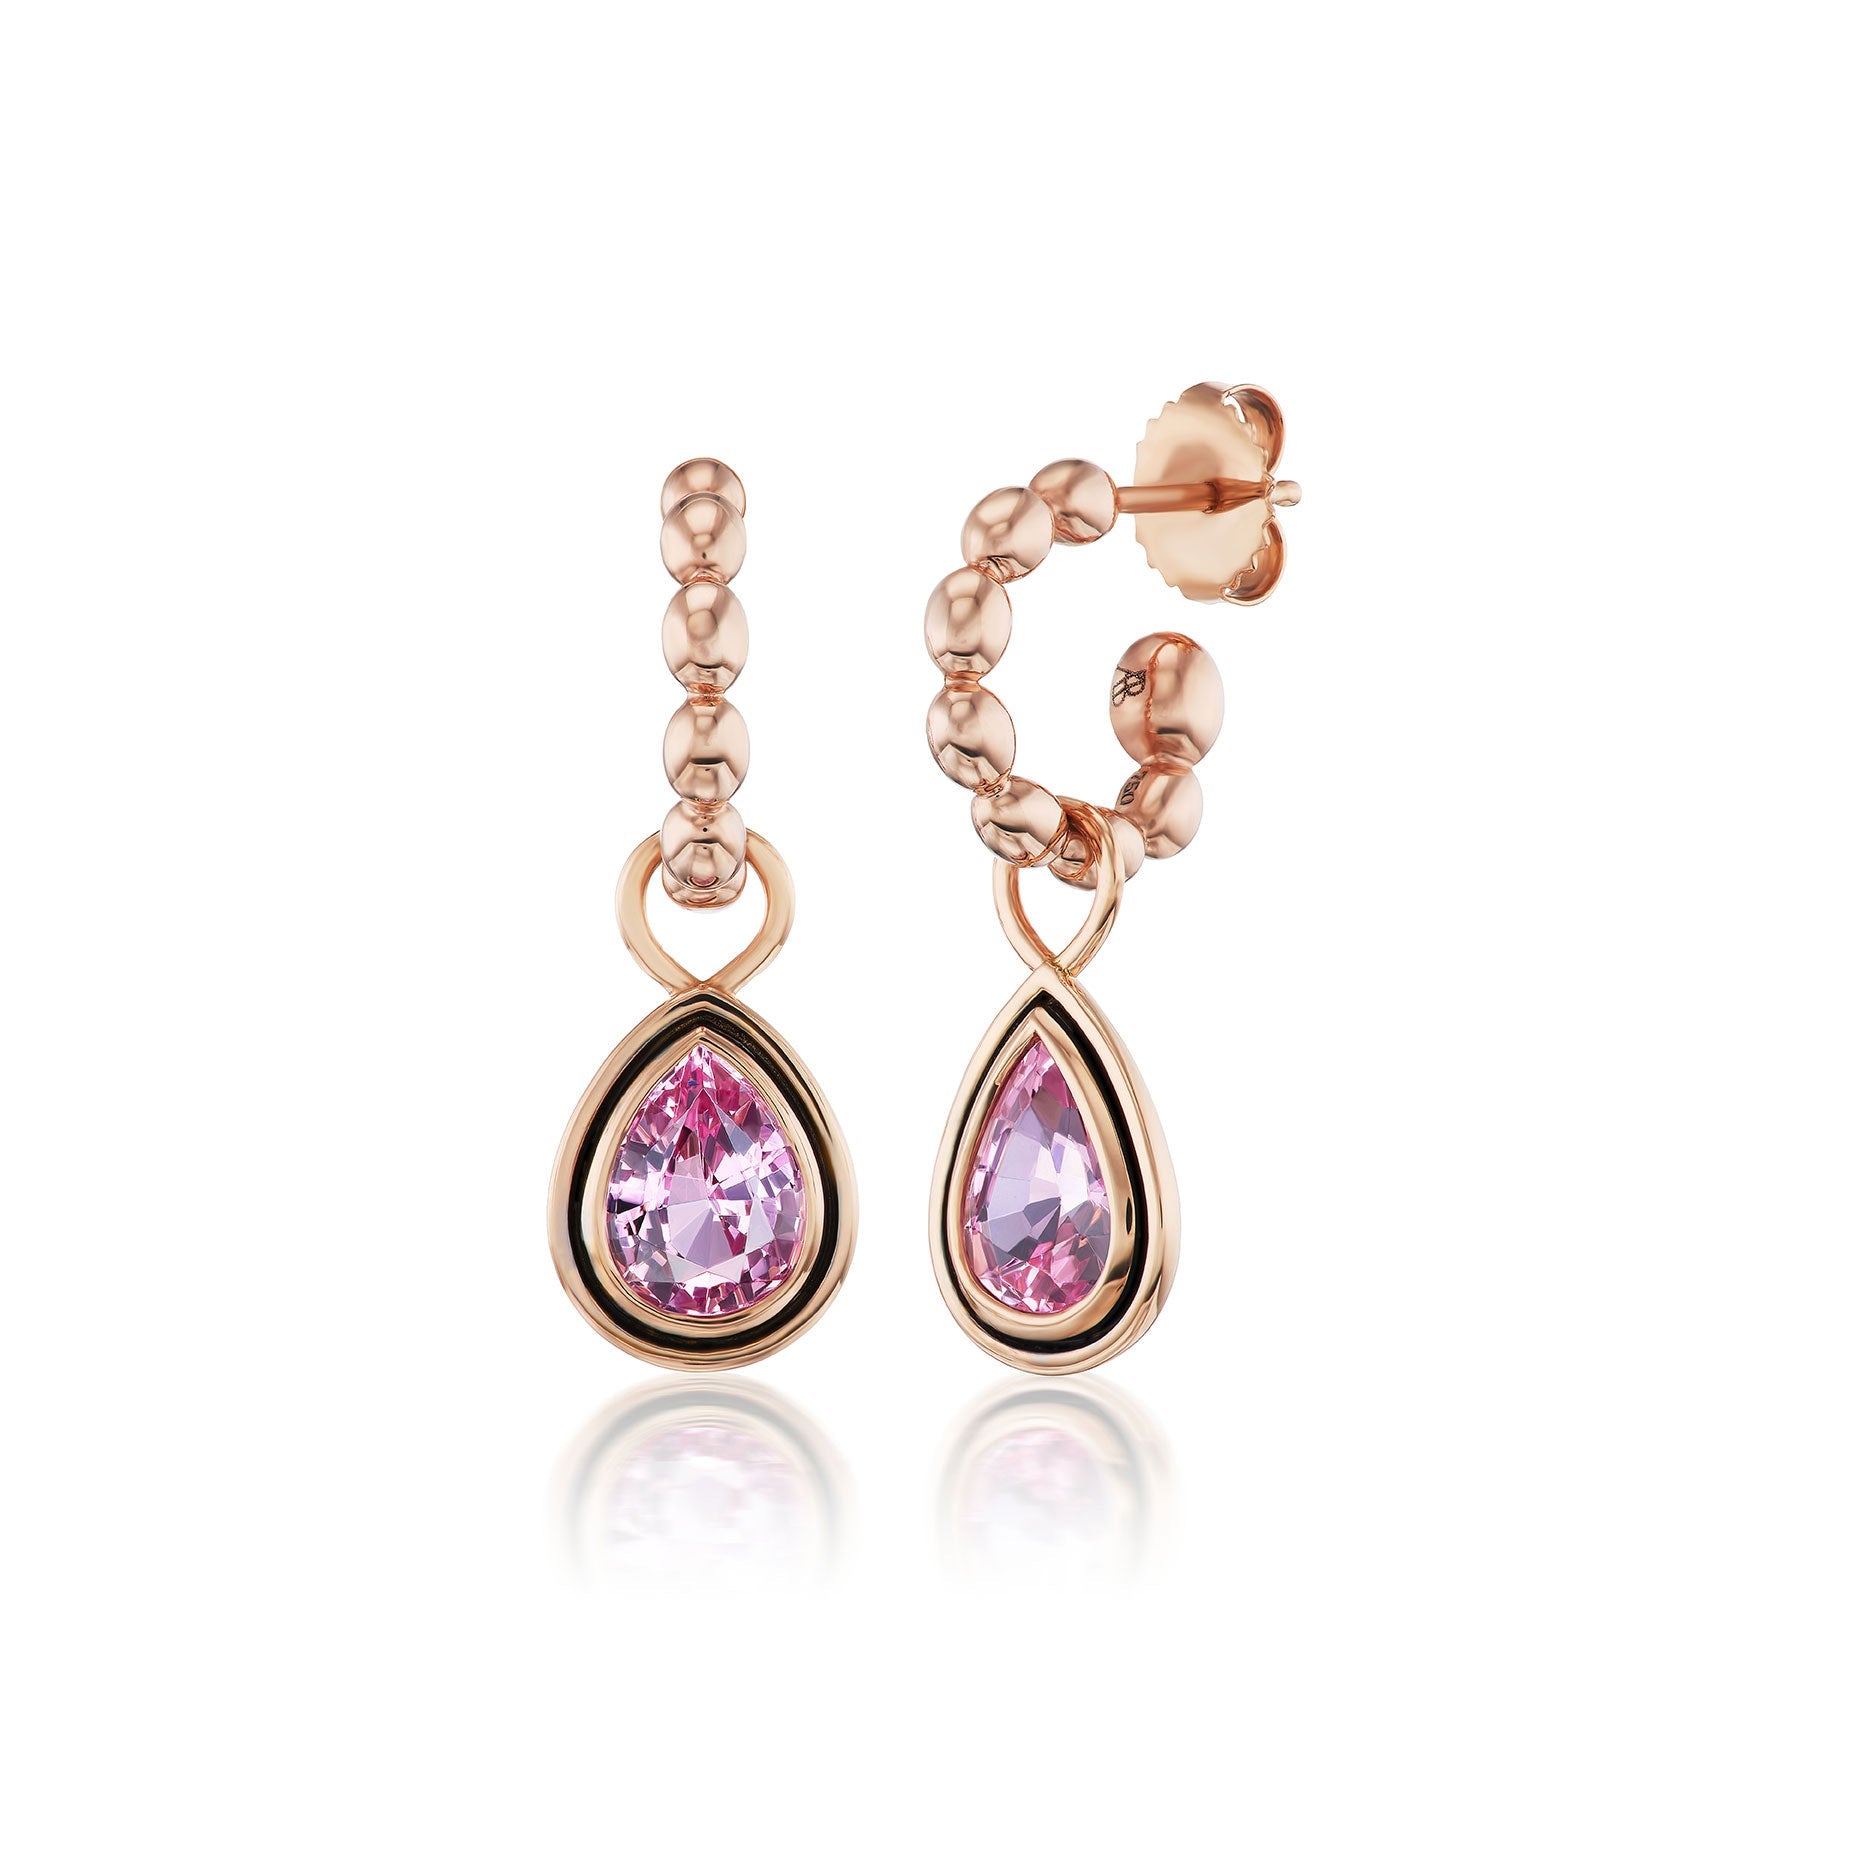 SPLASH SIGNATURE PETITE HOOPS WITH SPINEL DROPS - ANNE BAKERSPLASH SIGNATURE PETITE HOOPS WITH SPINEL DROPSANNE BAKER